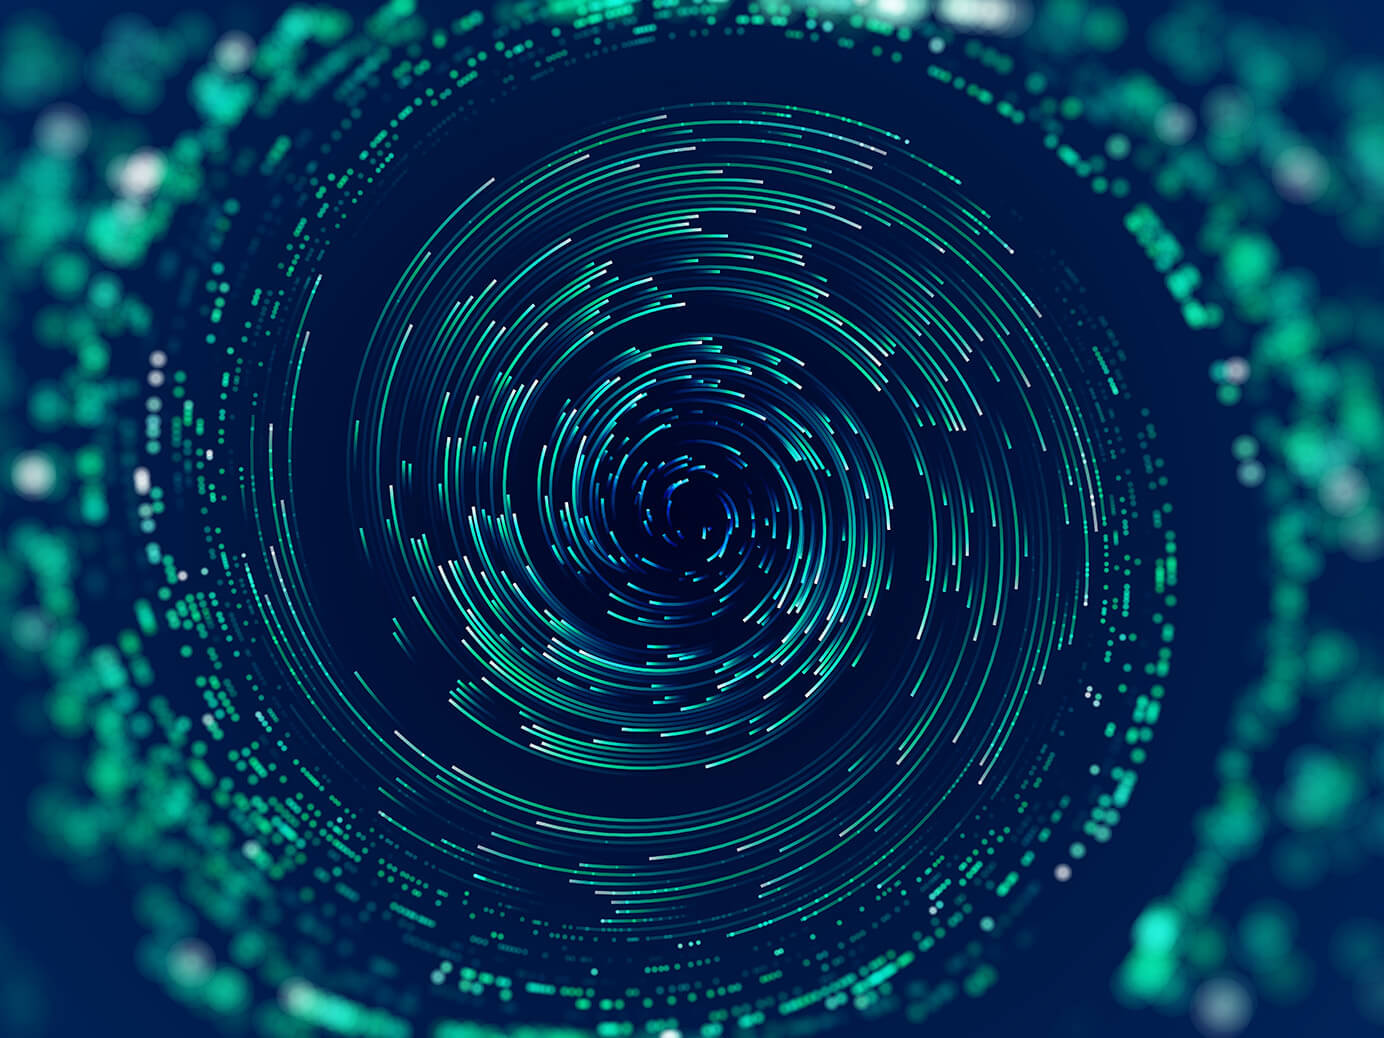 Digital image of blue and green spiral